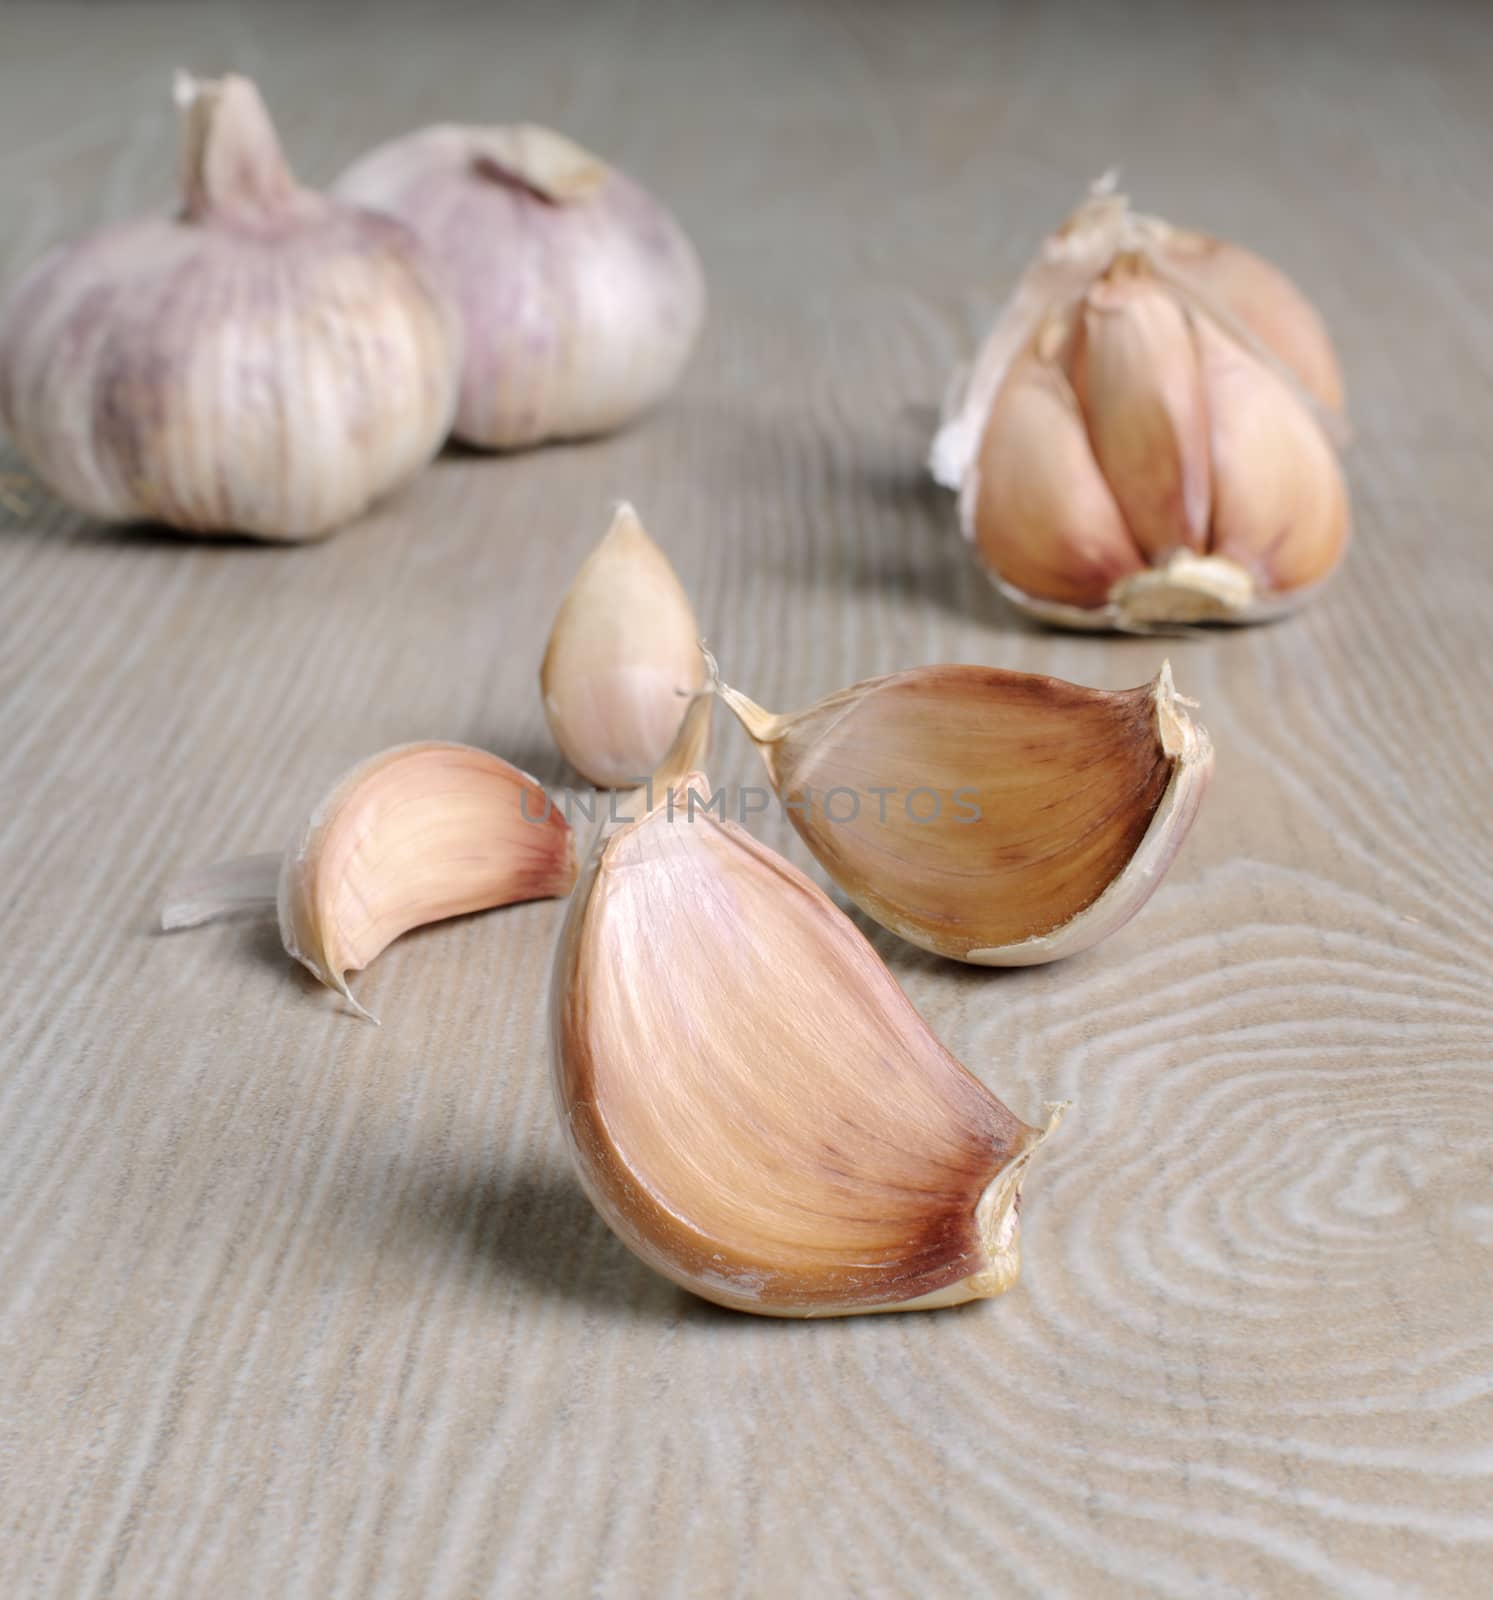 Cloves of garlic on the table by Apolonia